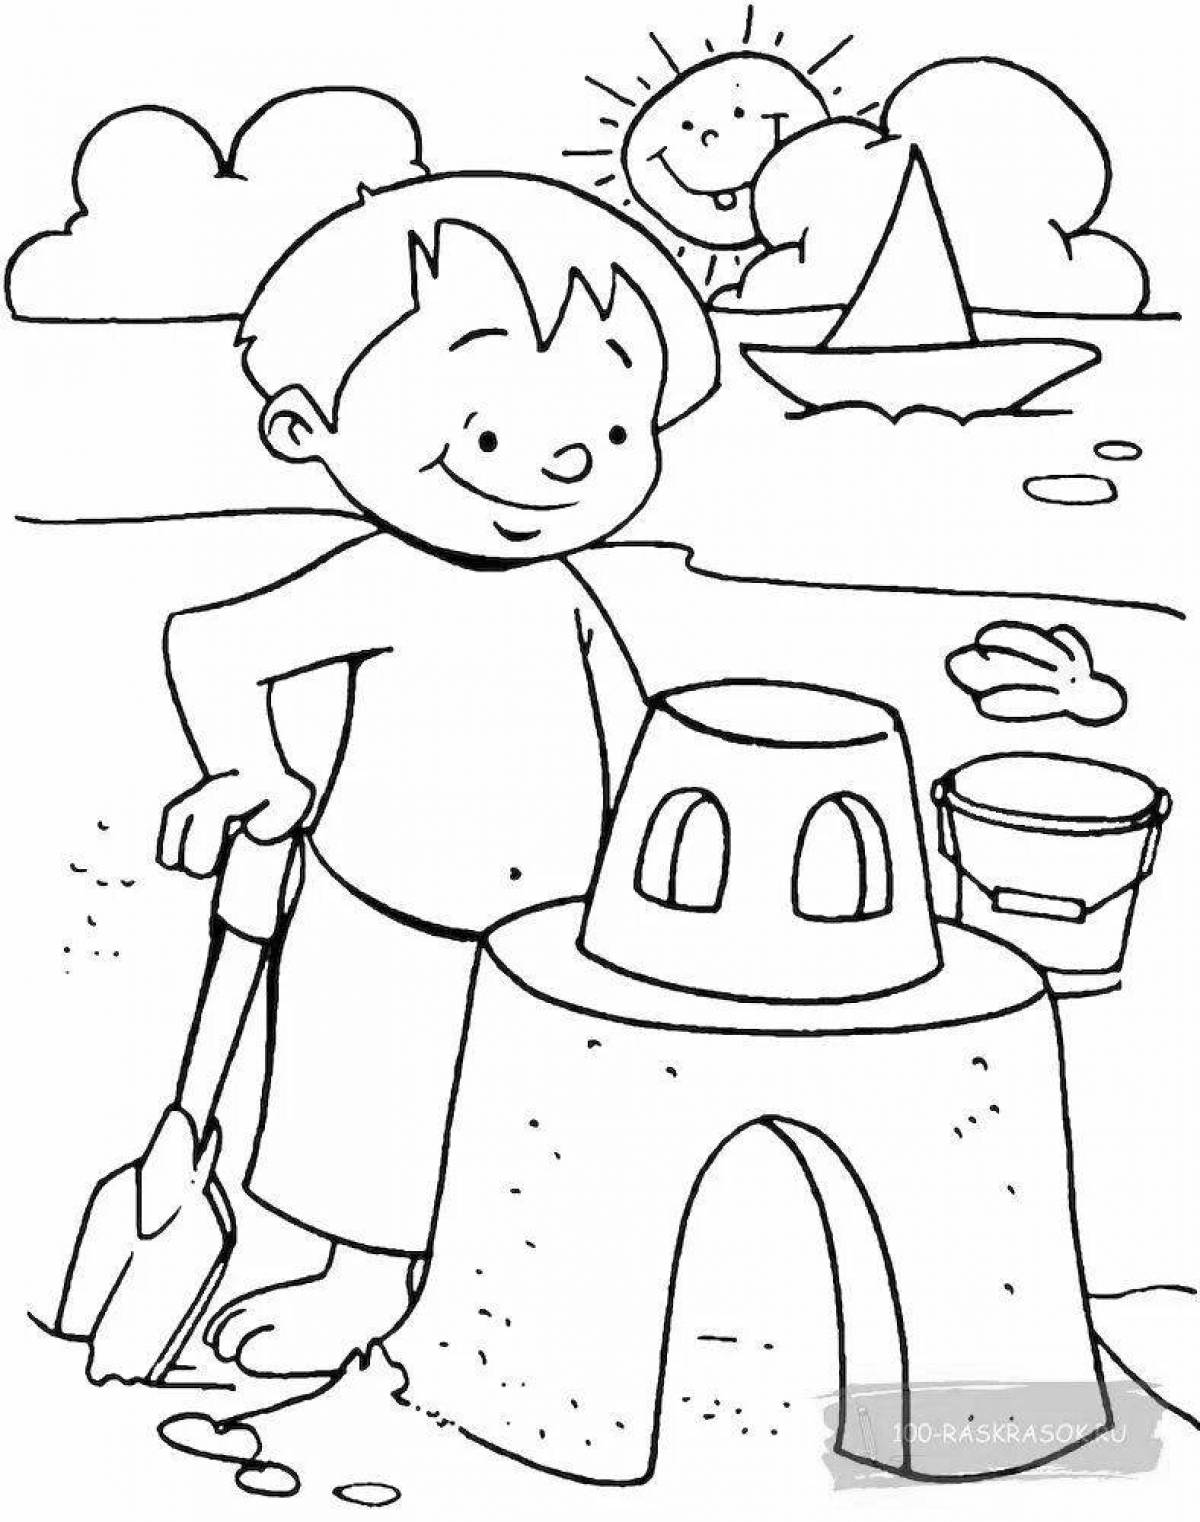 Great summer coloring book for kids